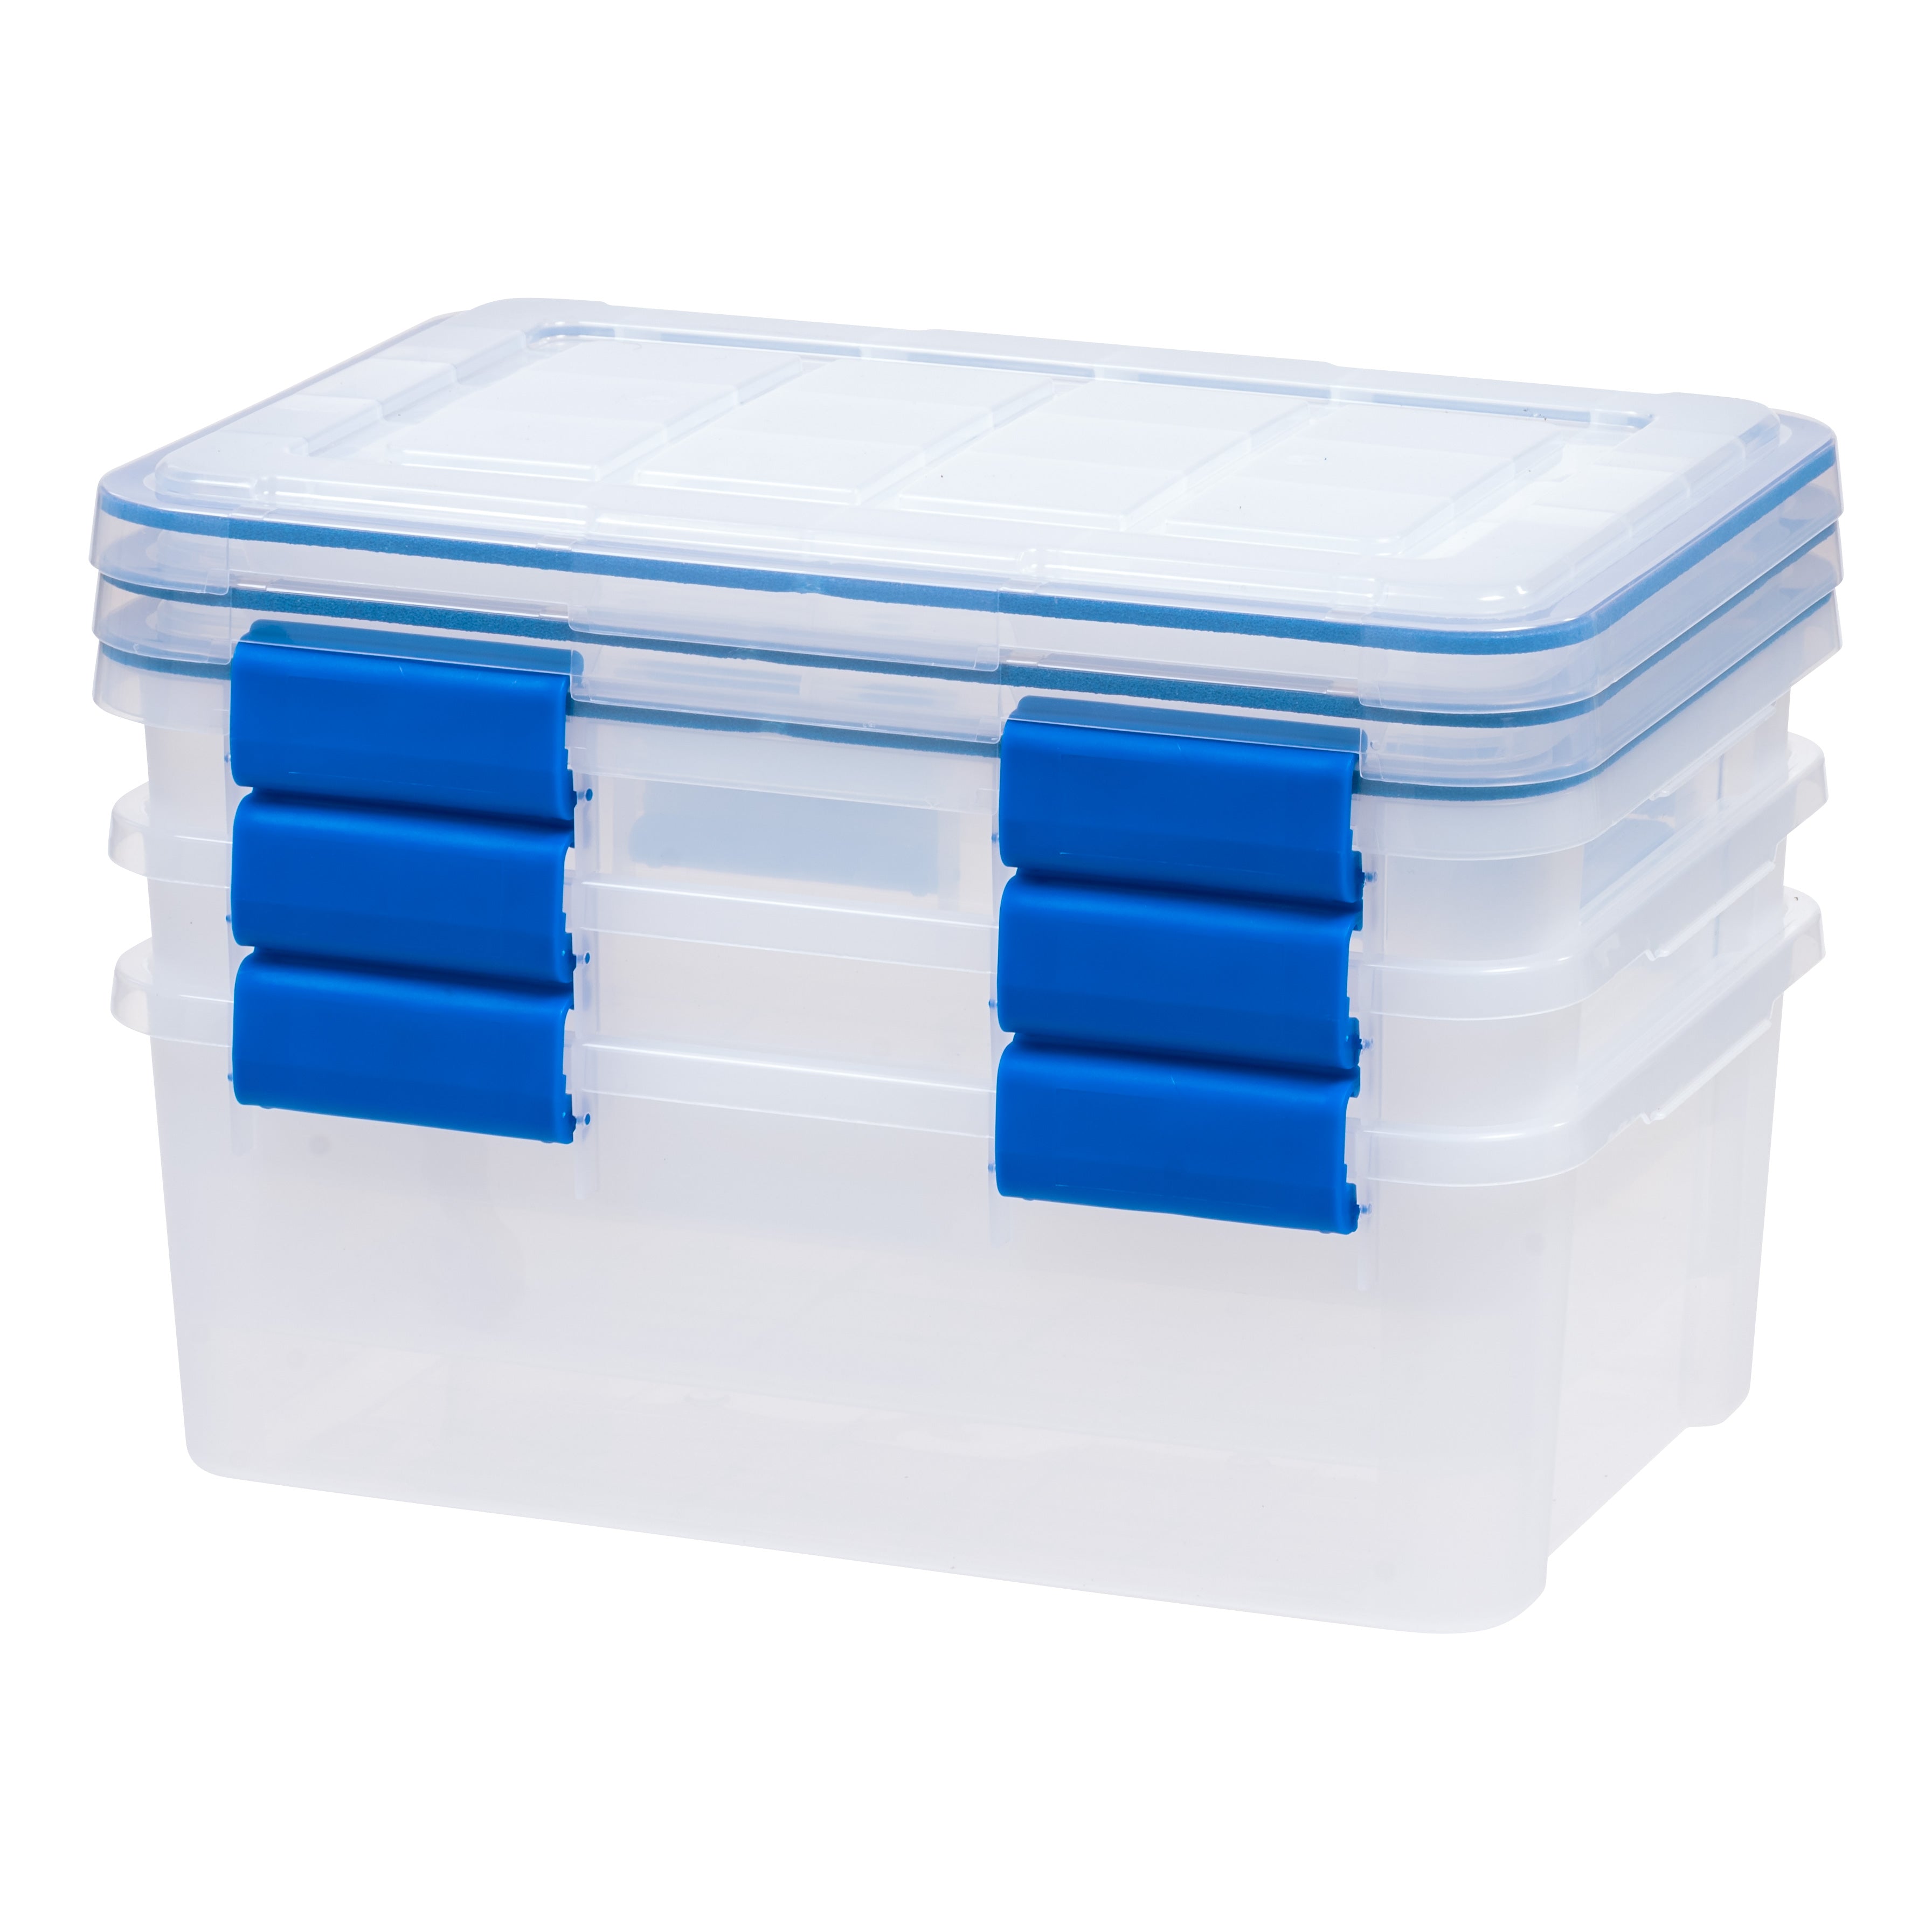 Iris USA 3 Pack 16 Quart WeatherPro Plastic Storage Box Durable Lid and Seal and Secure Latching Buckles